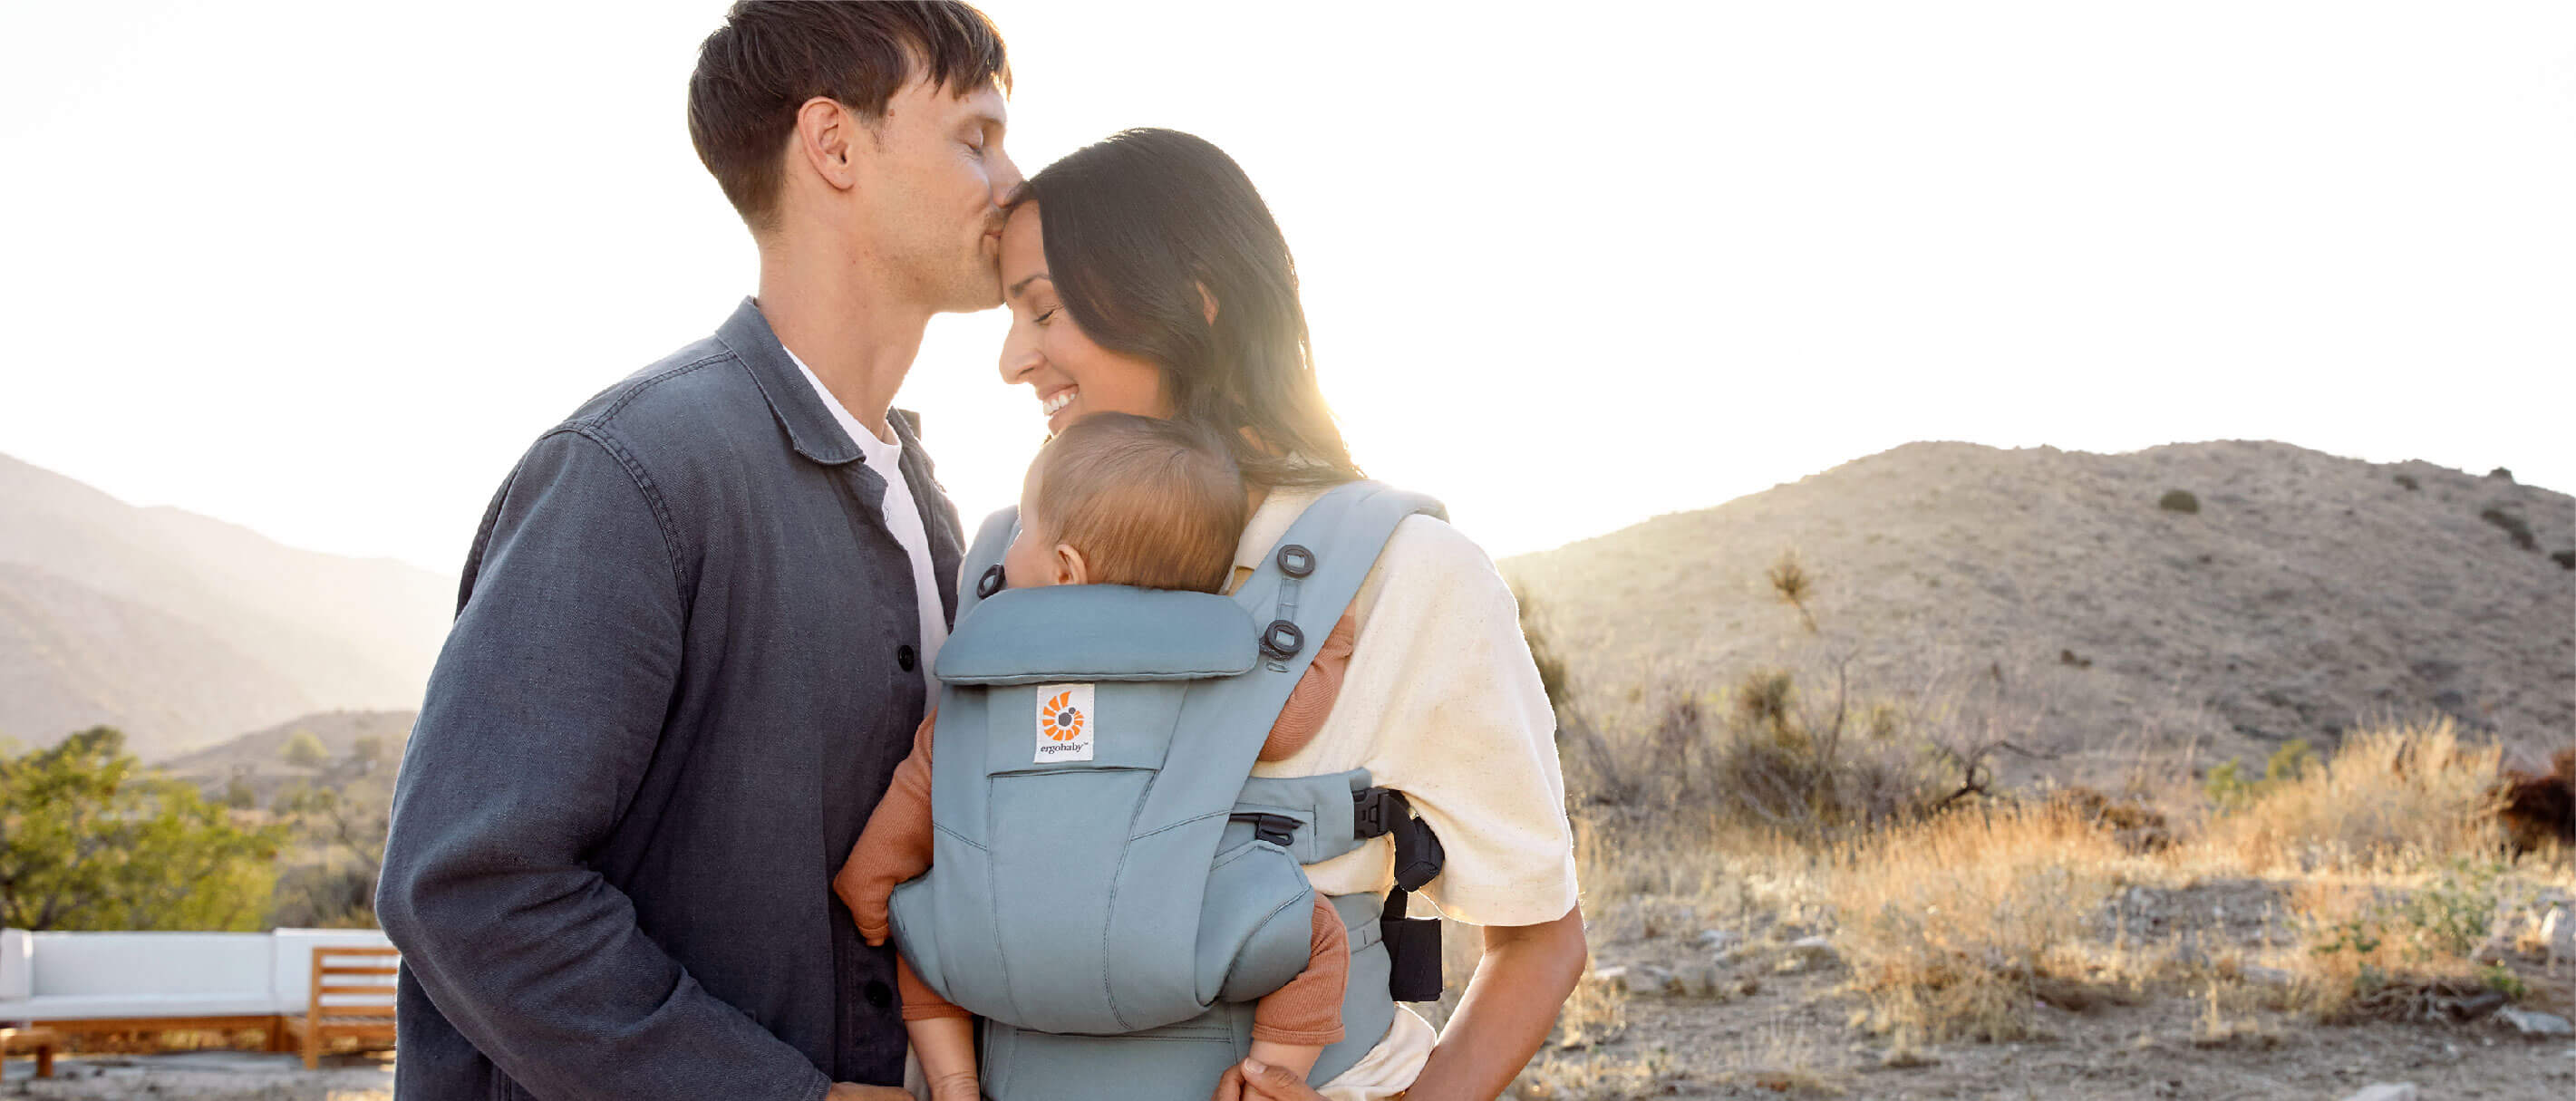 Photo parent carrying child in Omni Dream carrier outward facing